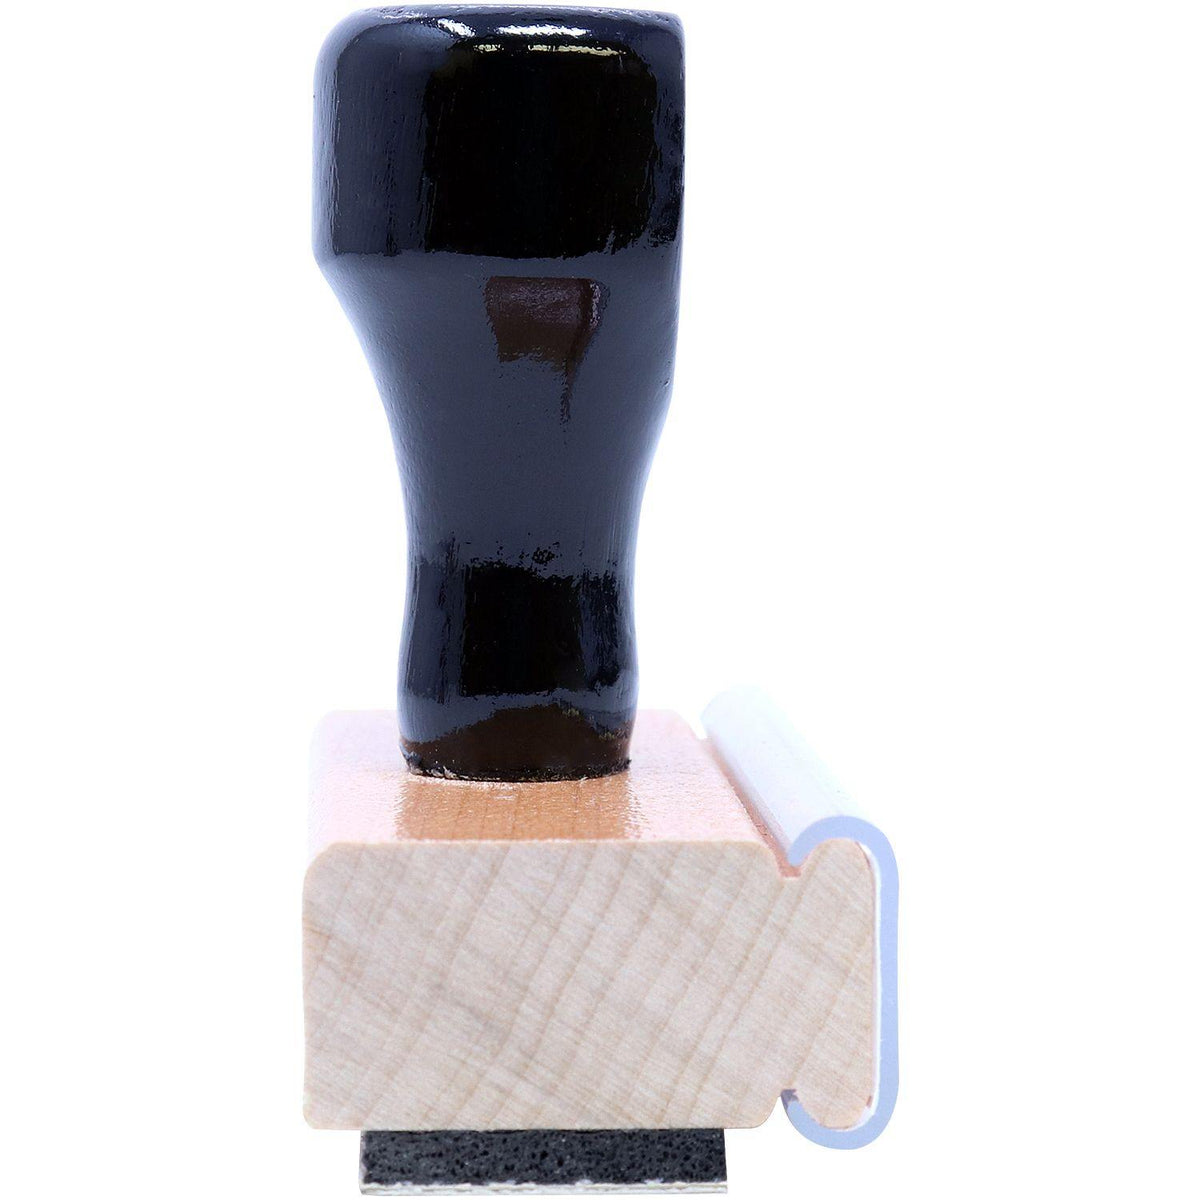 Side View of Large Copy Rubber Stamp